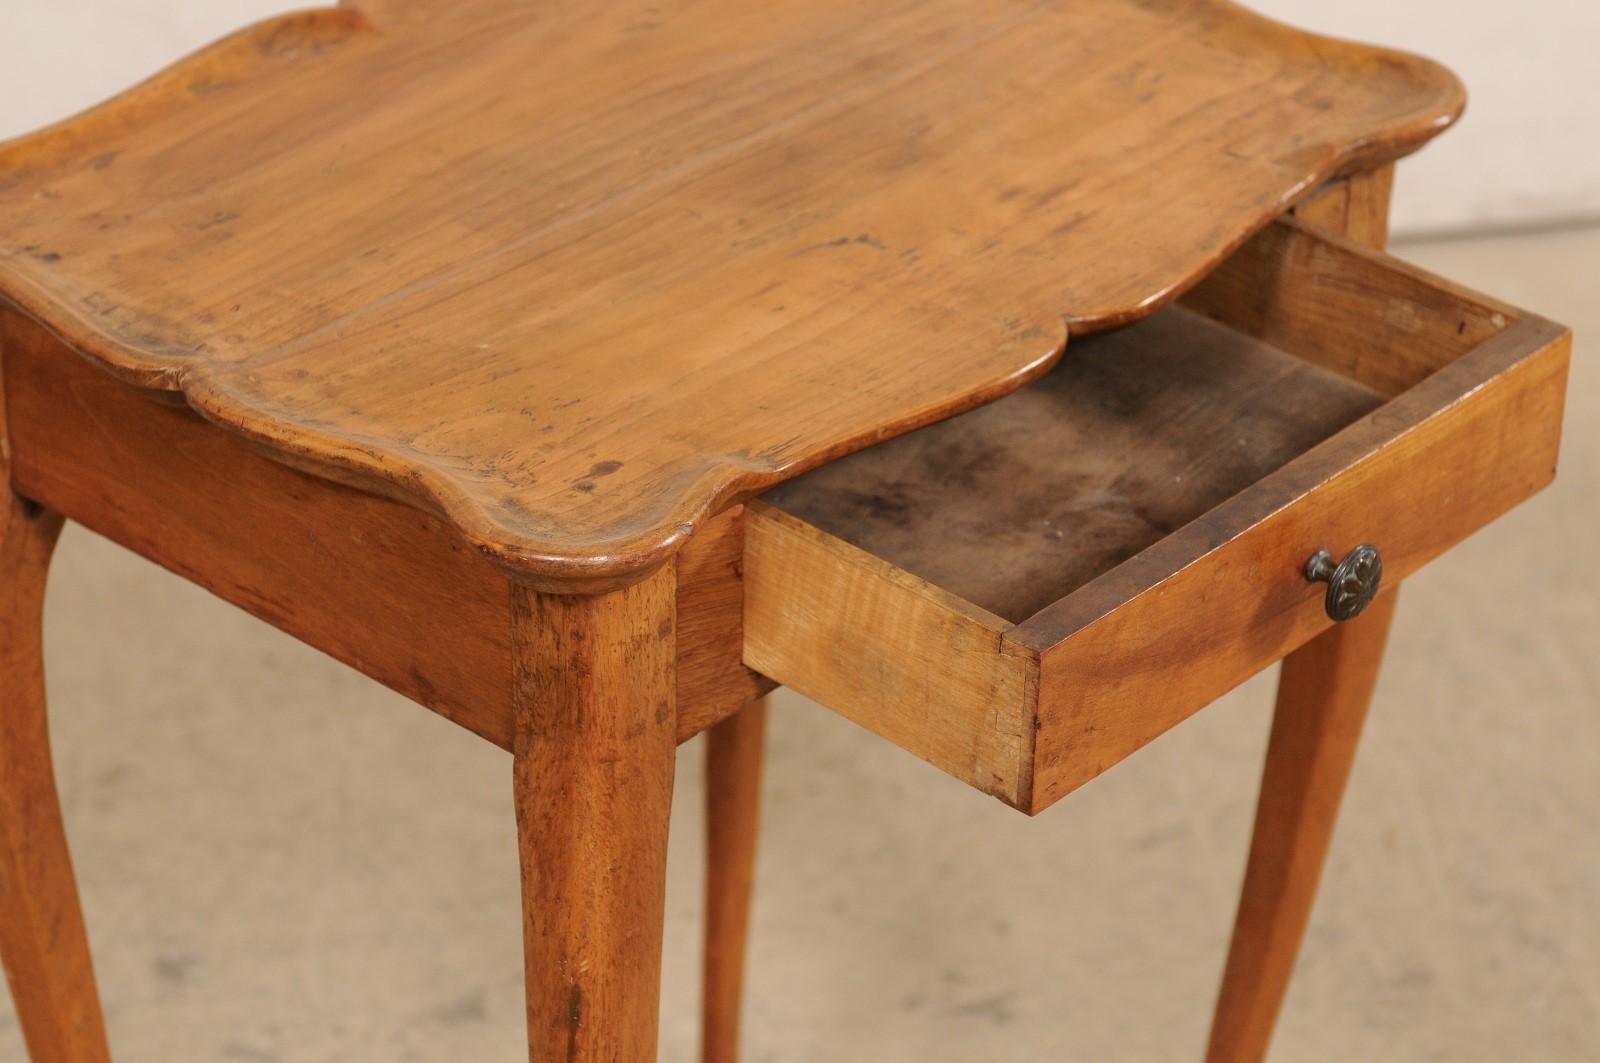 19th Century French Side Table w/Single Drawer and Rectangular-Shaped Pie-Crust Top, 19th C